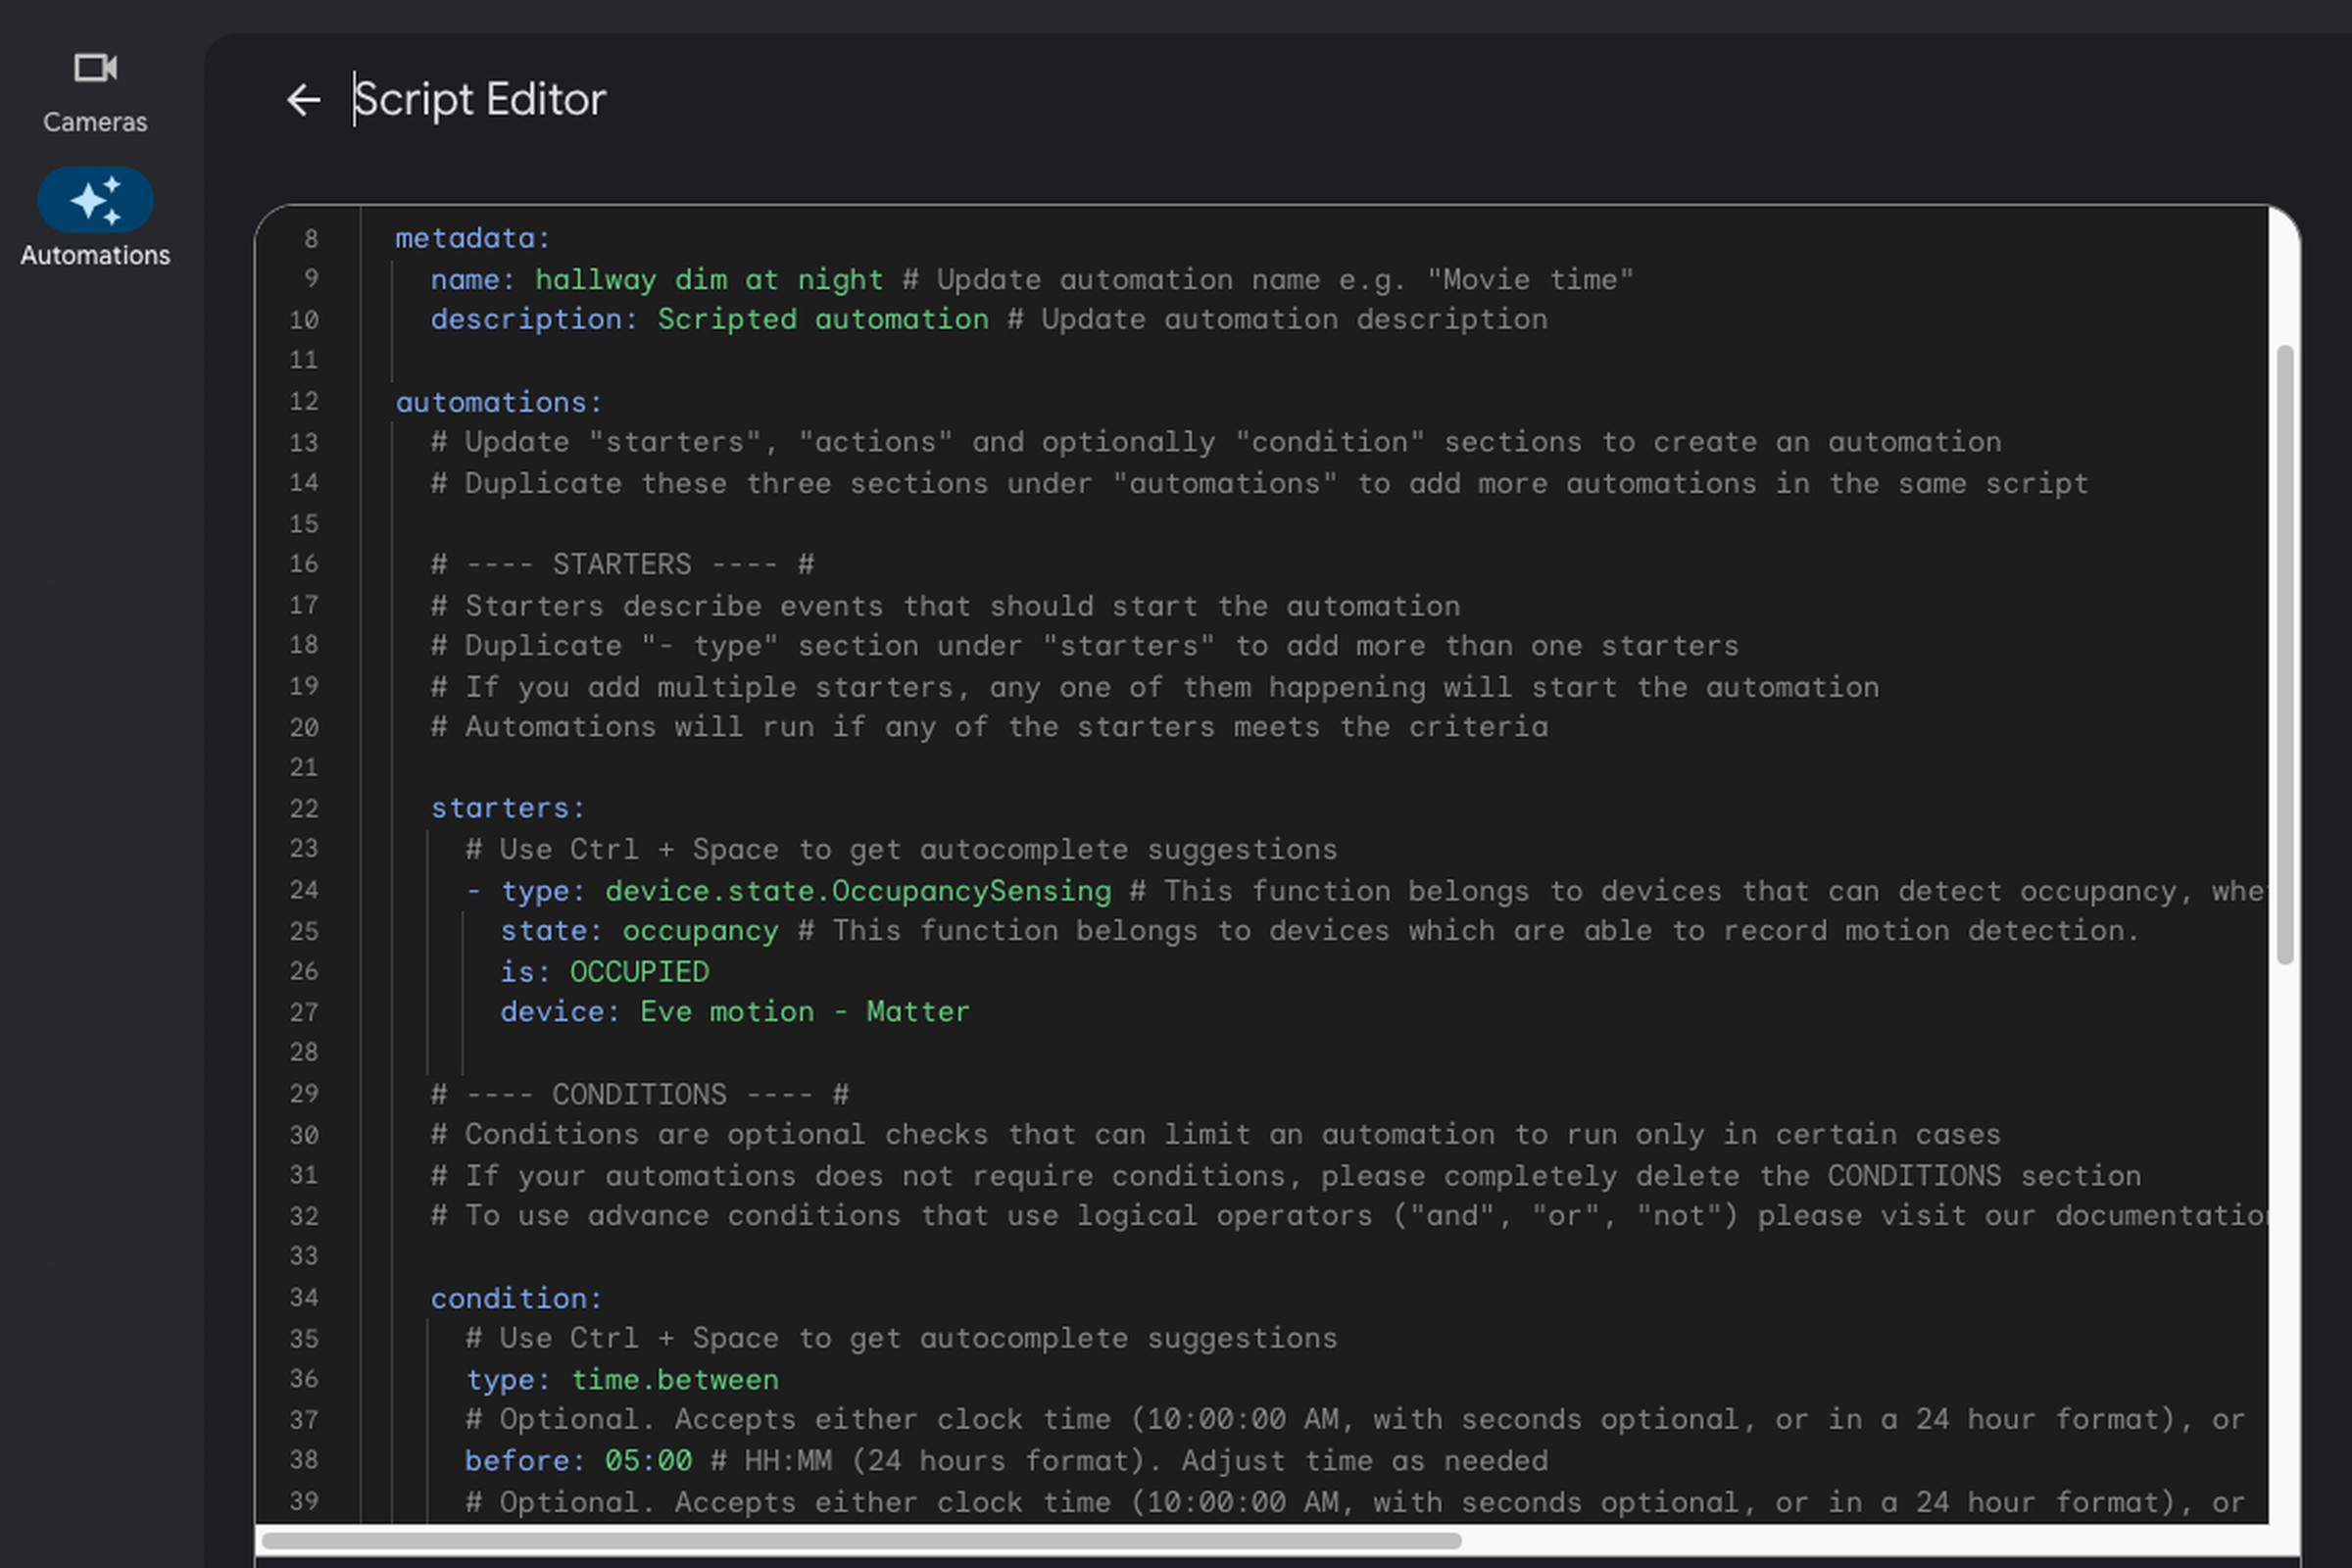 The new Google Home script editor is now available to those in the public preview.